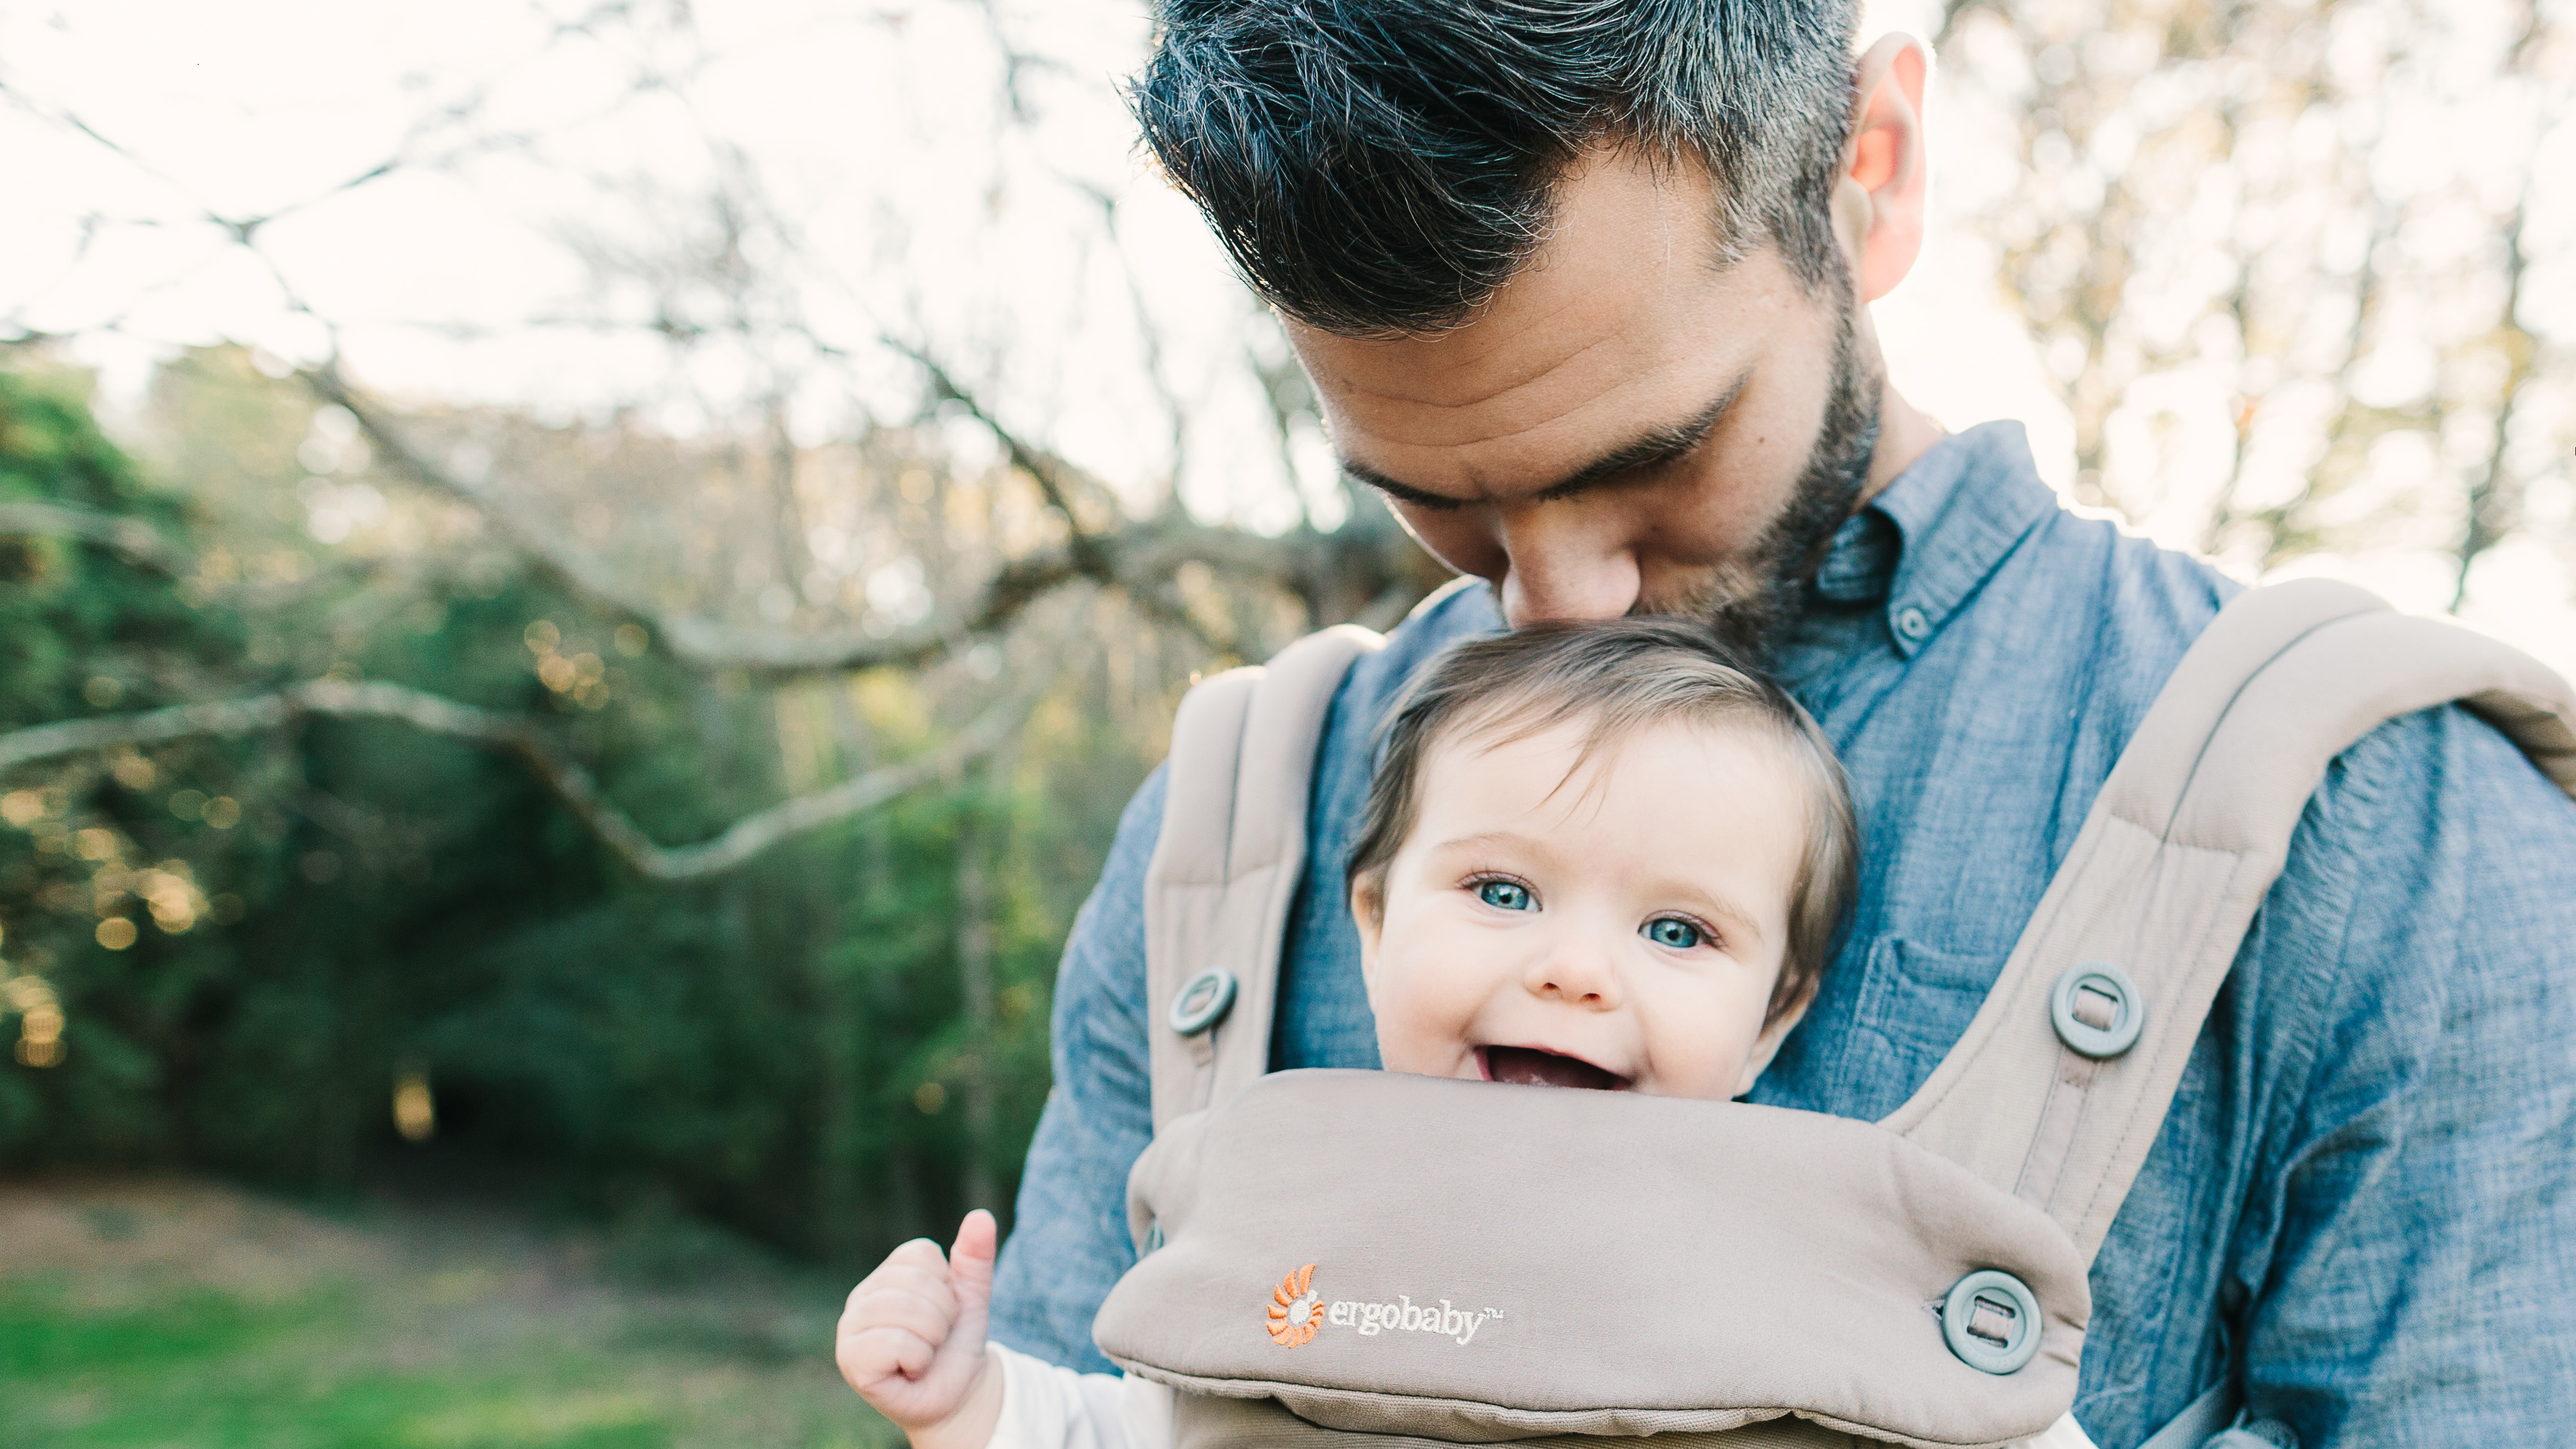 ergobaby products